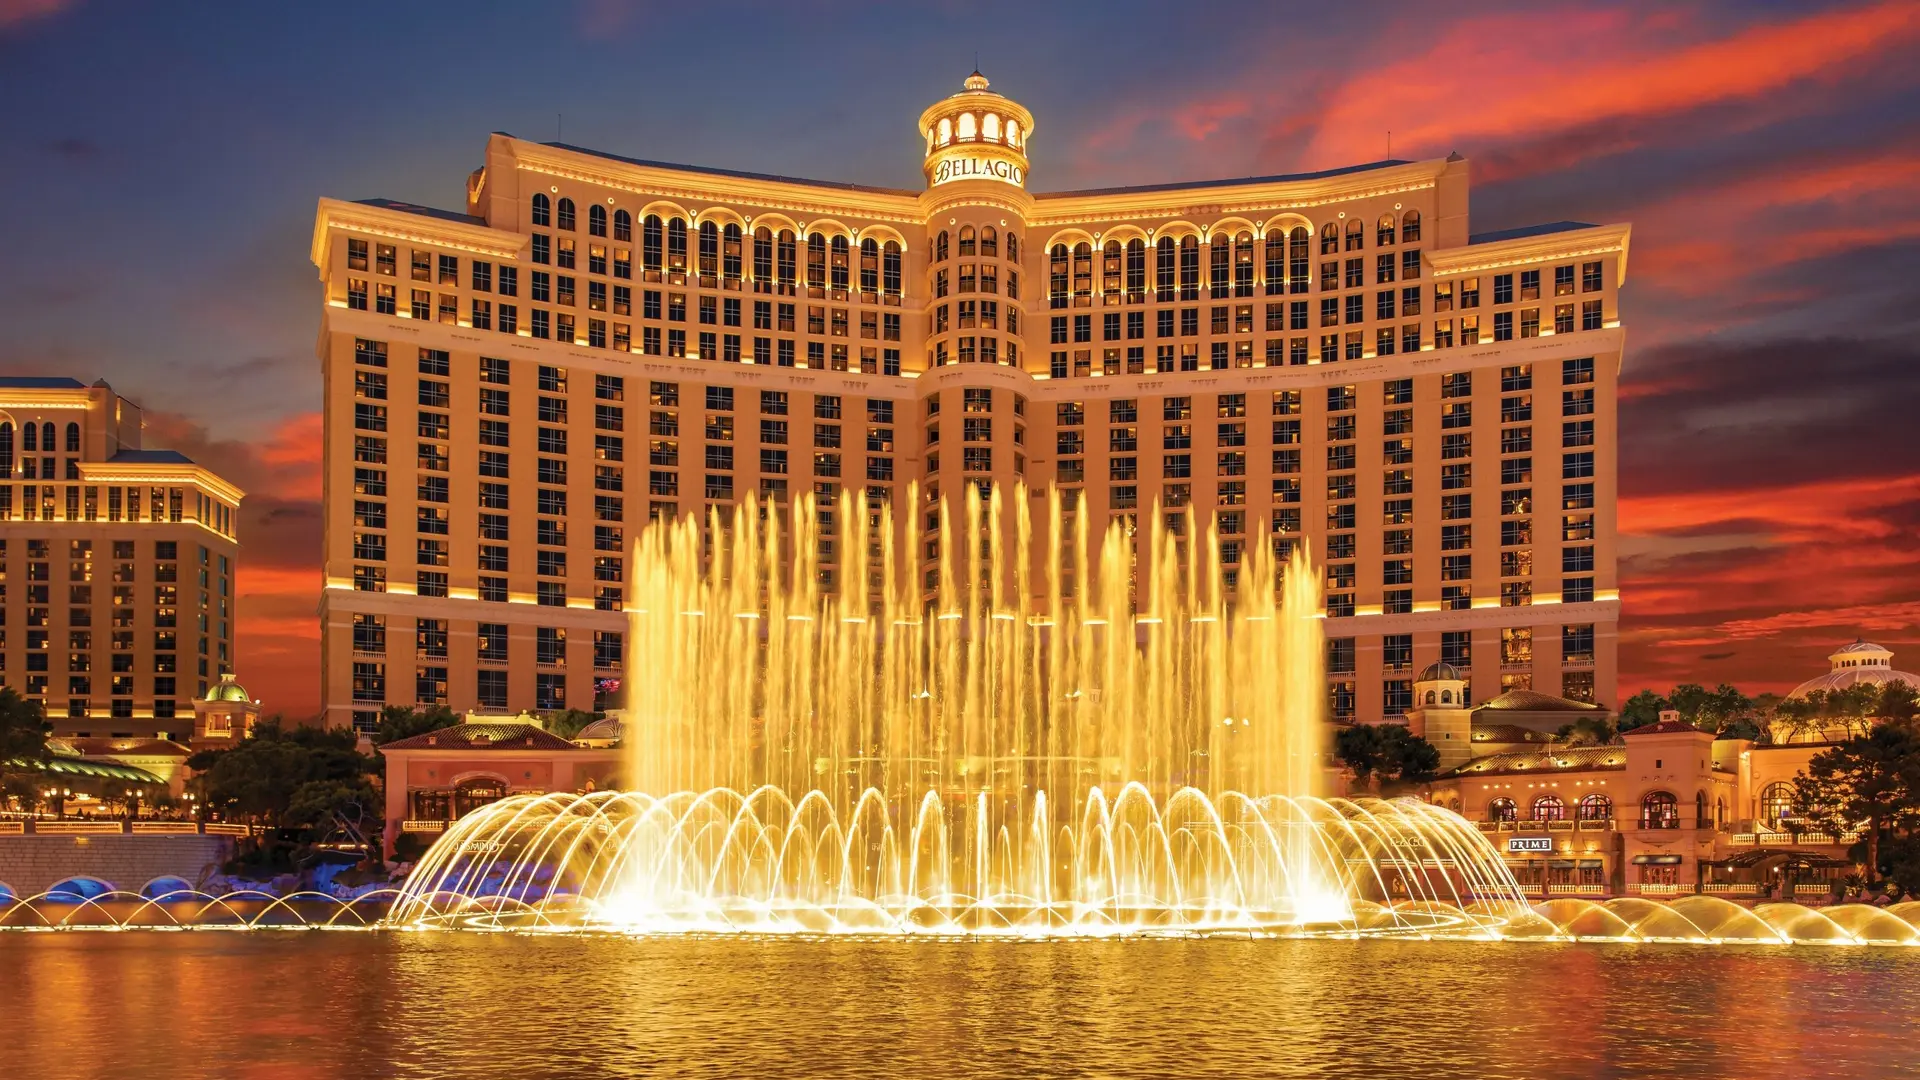 Large fountain with golden coloured water, and wide and tall building behind in a tender yellow colour with a tower in the centre saying: Bellagio. 